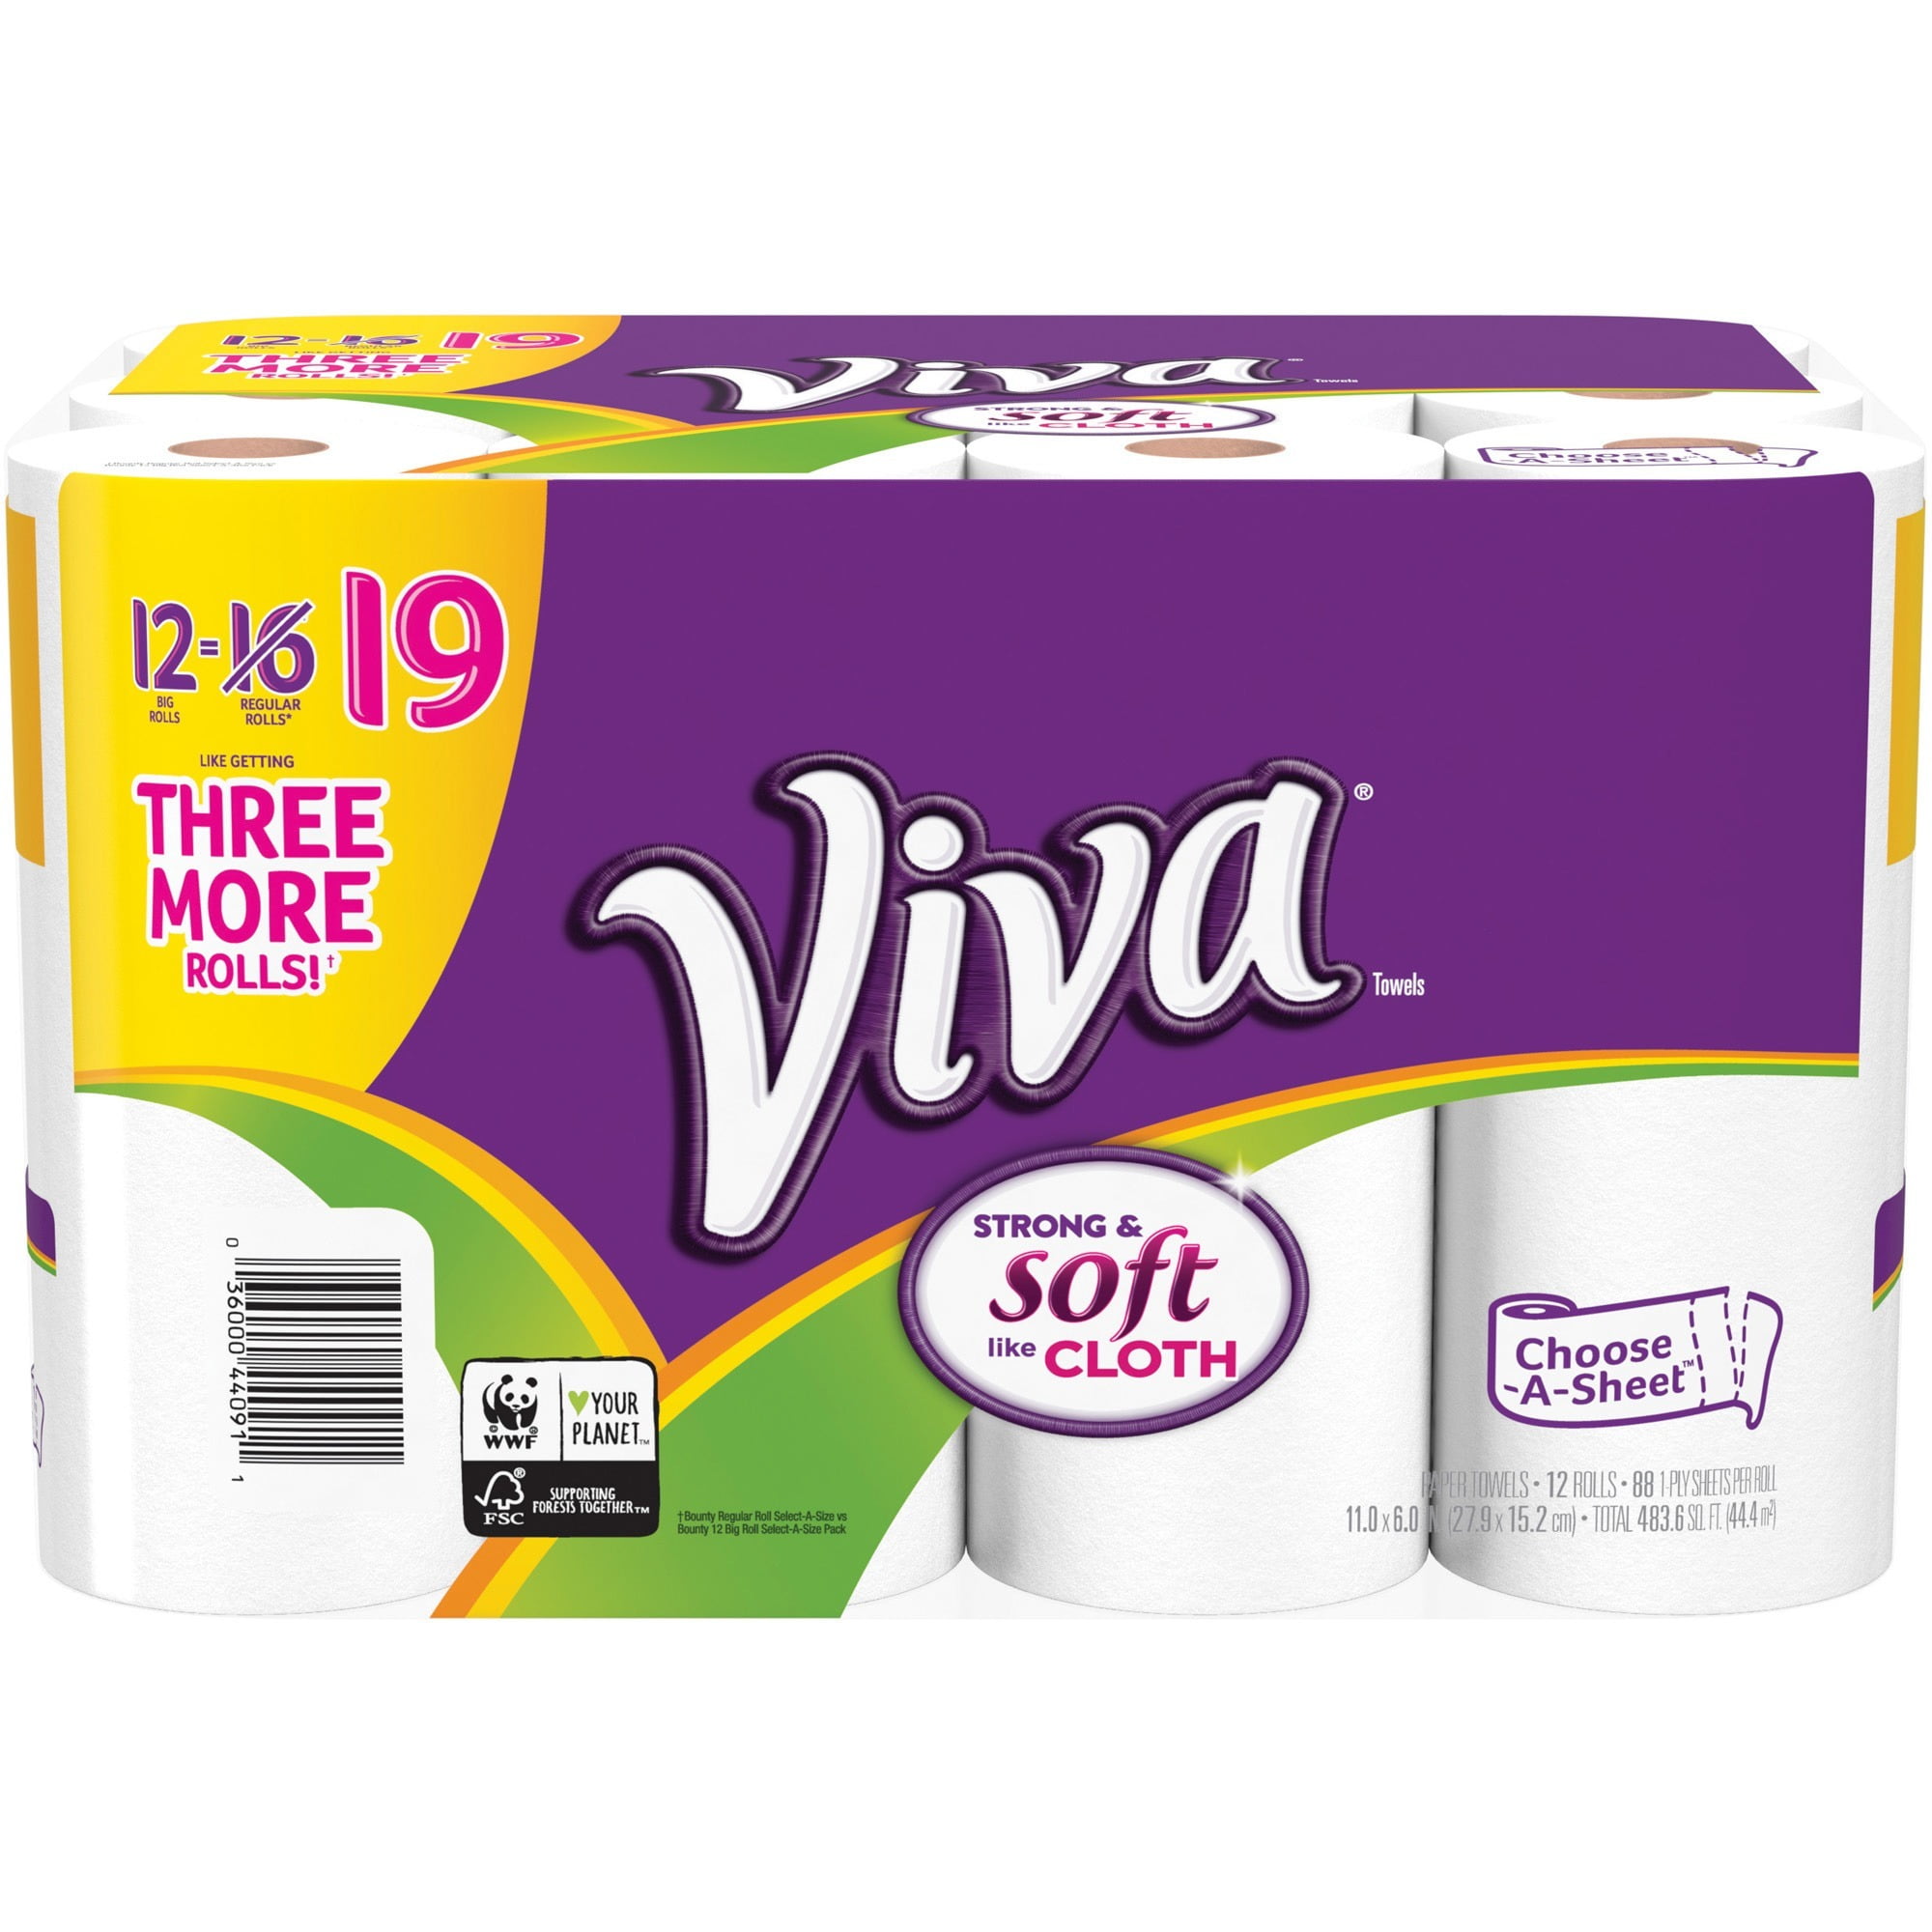 VIVA DOUBLE ROLL PAPER TOWELS SHIPS 2-4 DAY PRIORITY 6 ROLLS = 12 BIG ROLLS 